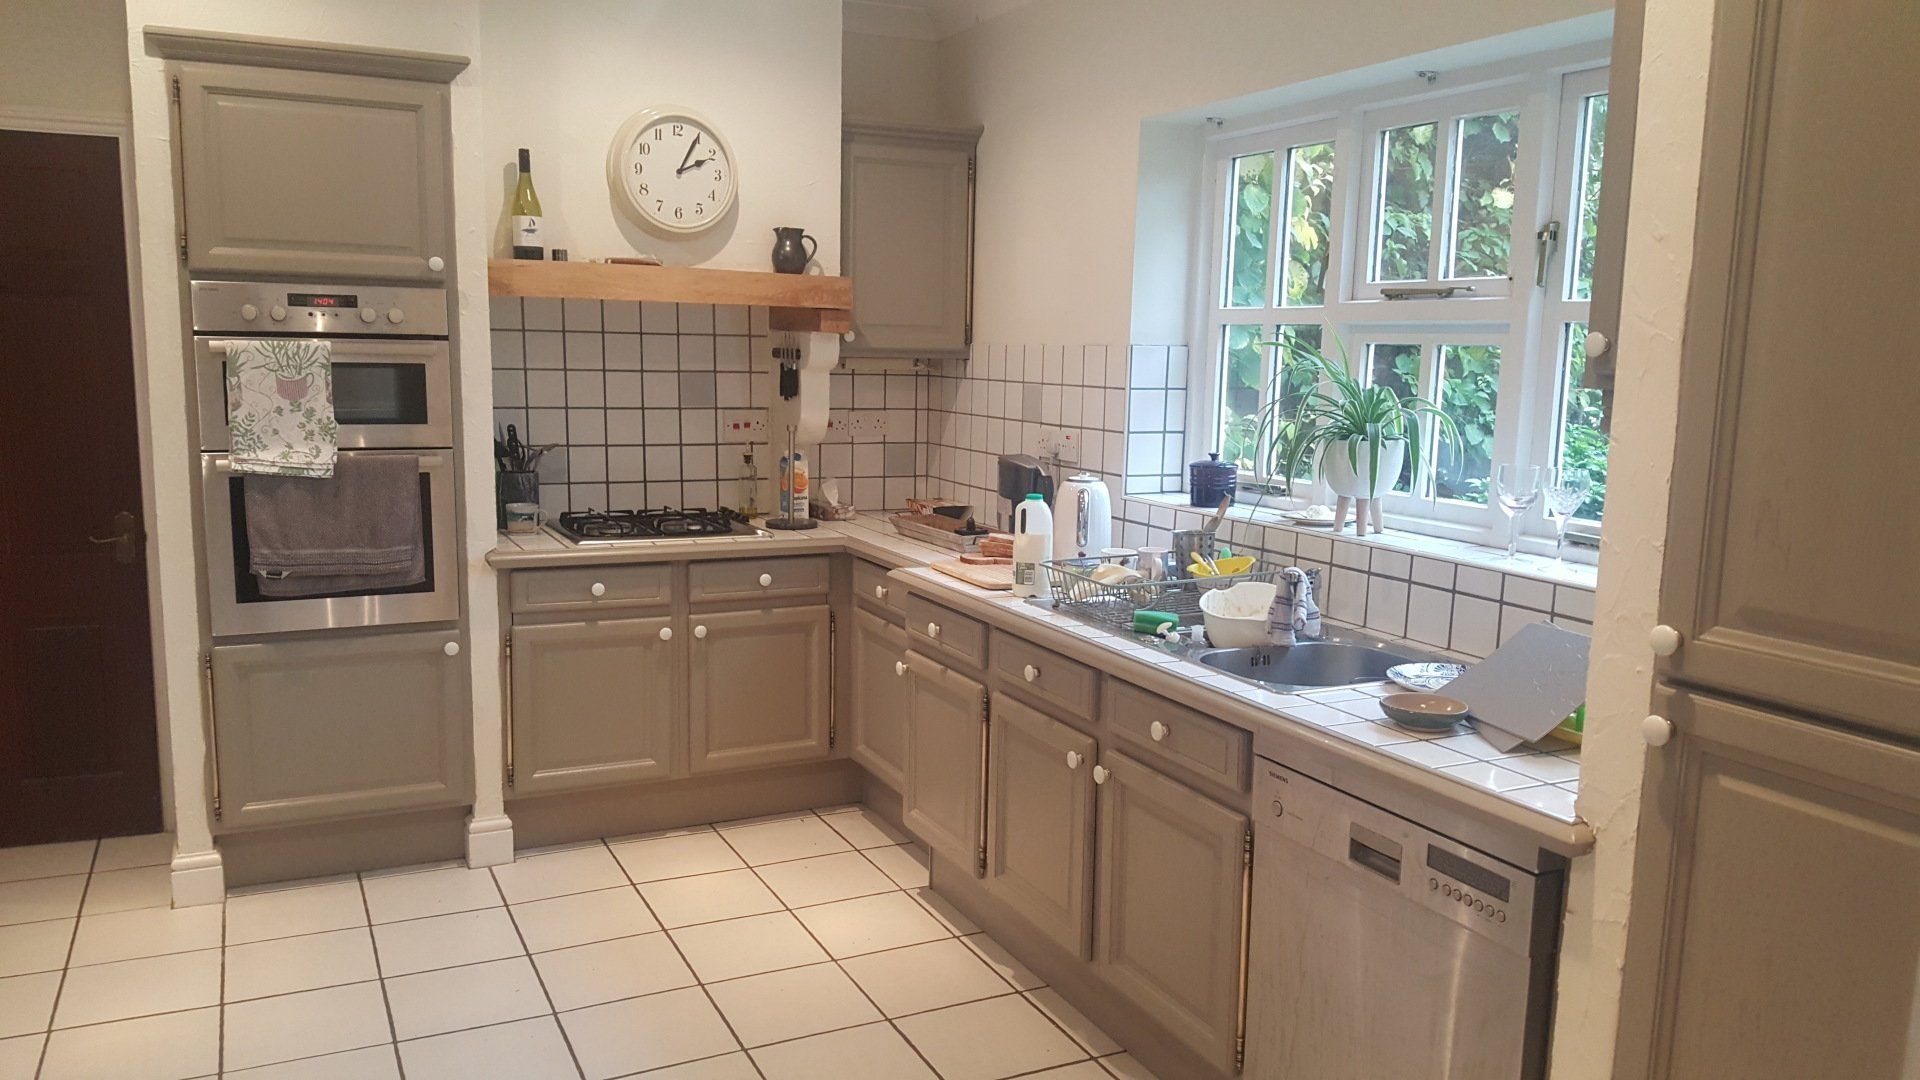 Kitchen panels painted in grey taupe